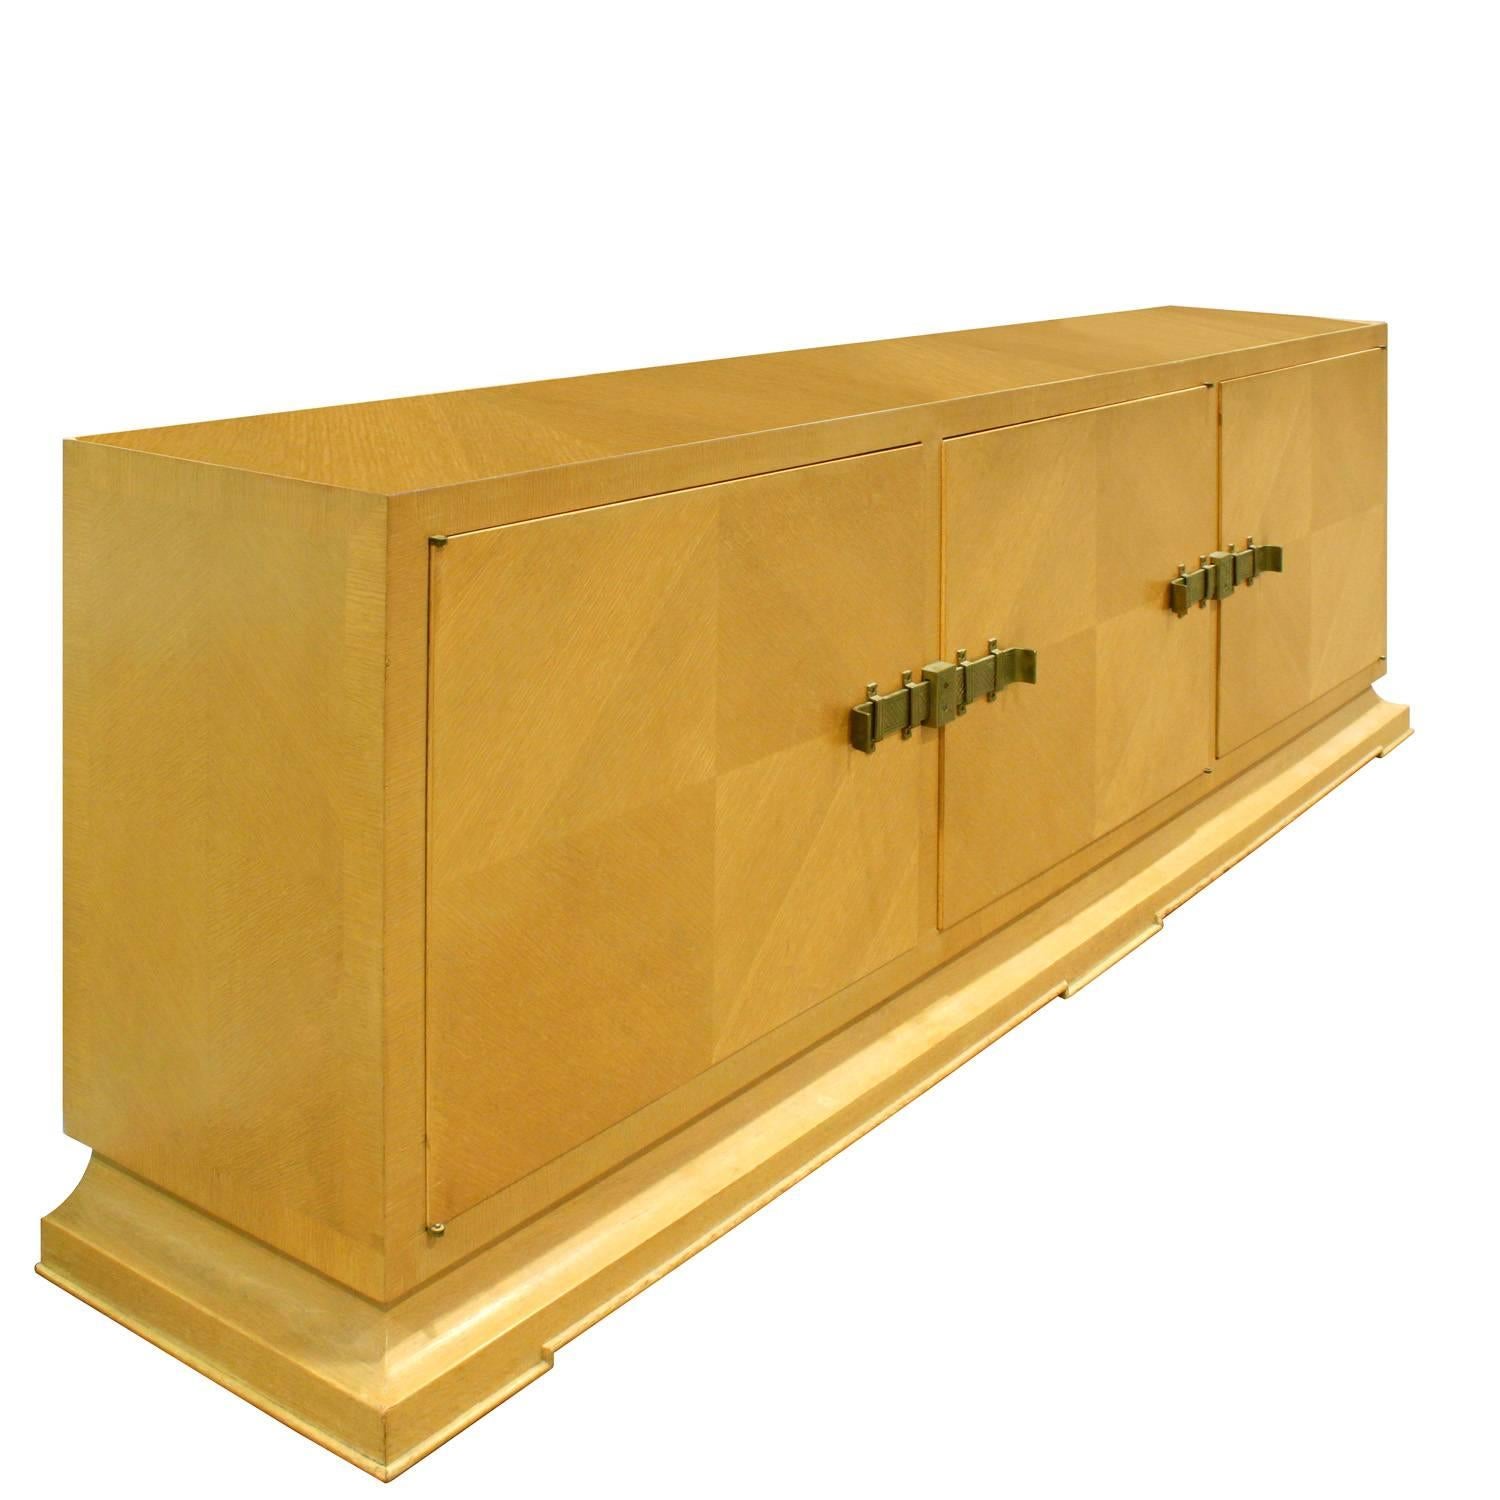 Large credenza TP-19M in crossbanded mahogany with handmade brass bolts by Tommi Parzinger for Charak Modern, American 1940s (signed with Charak Modern label in drawer).